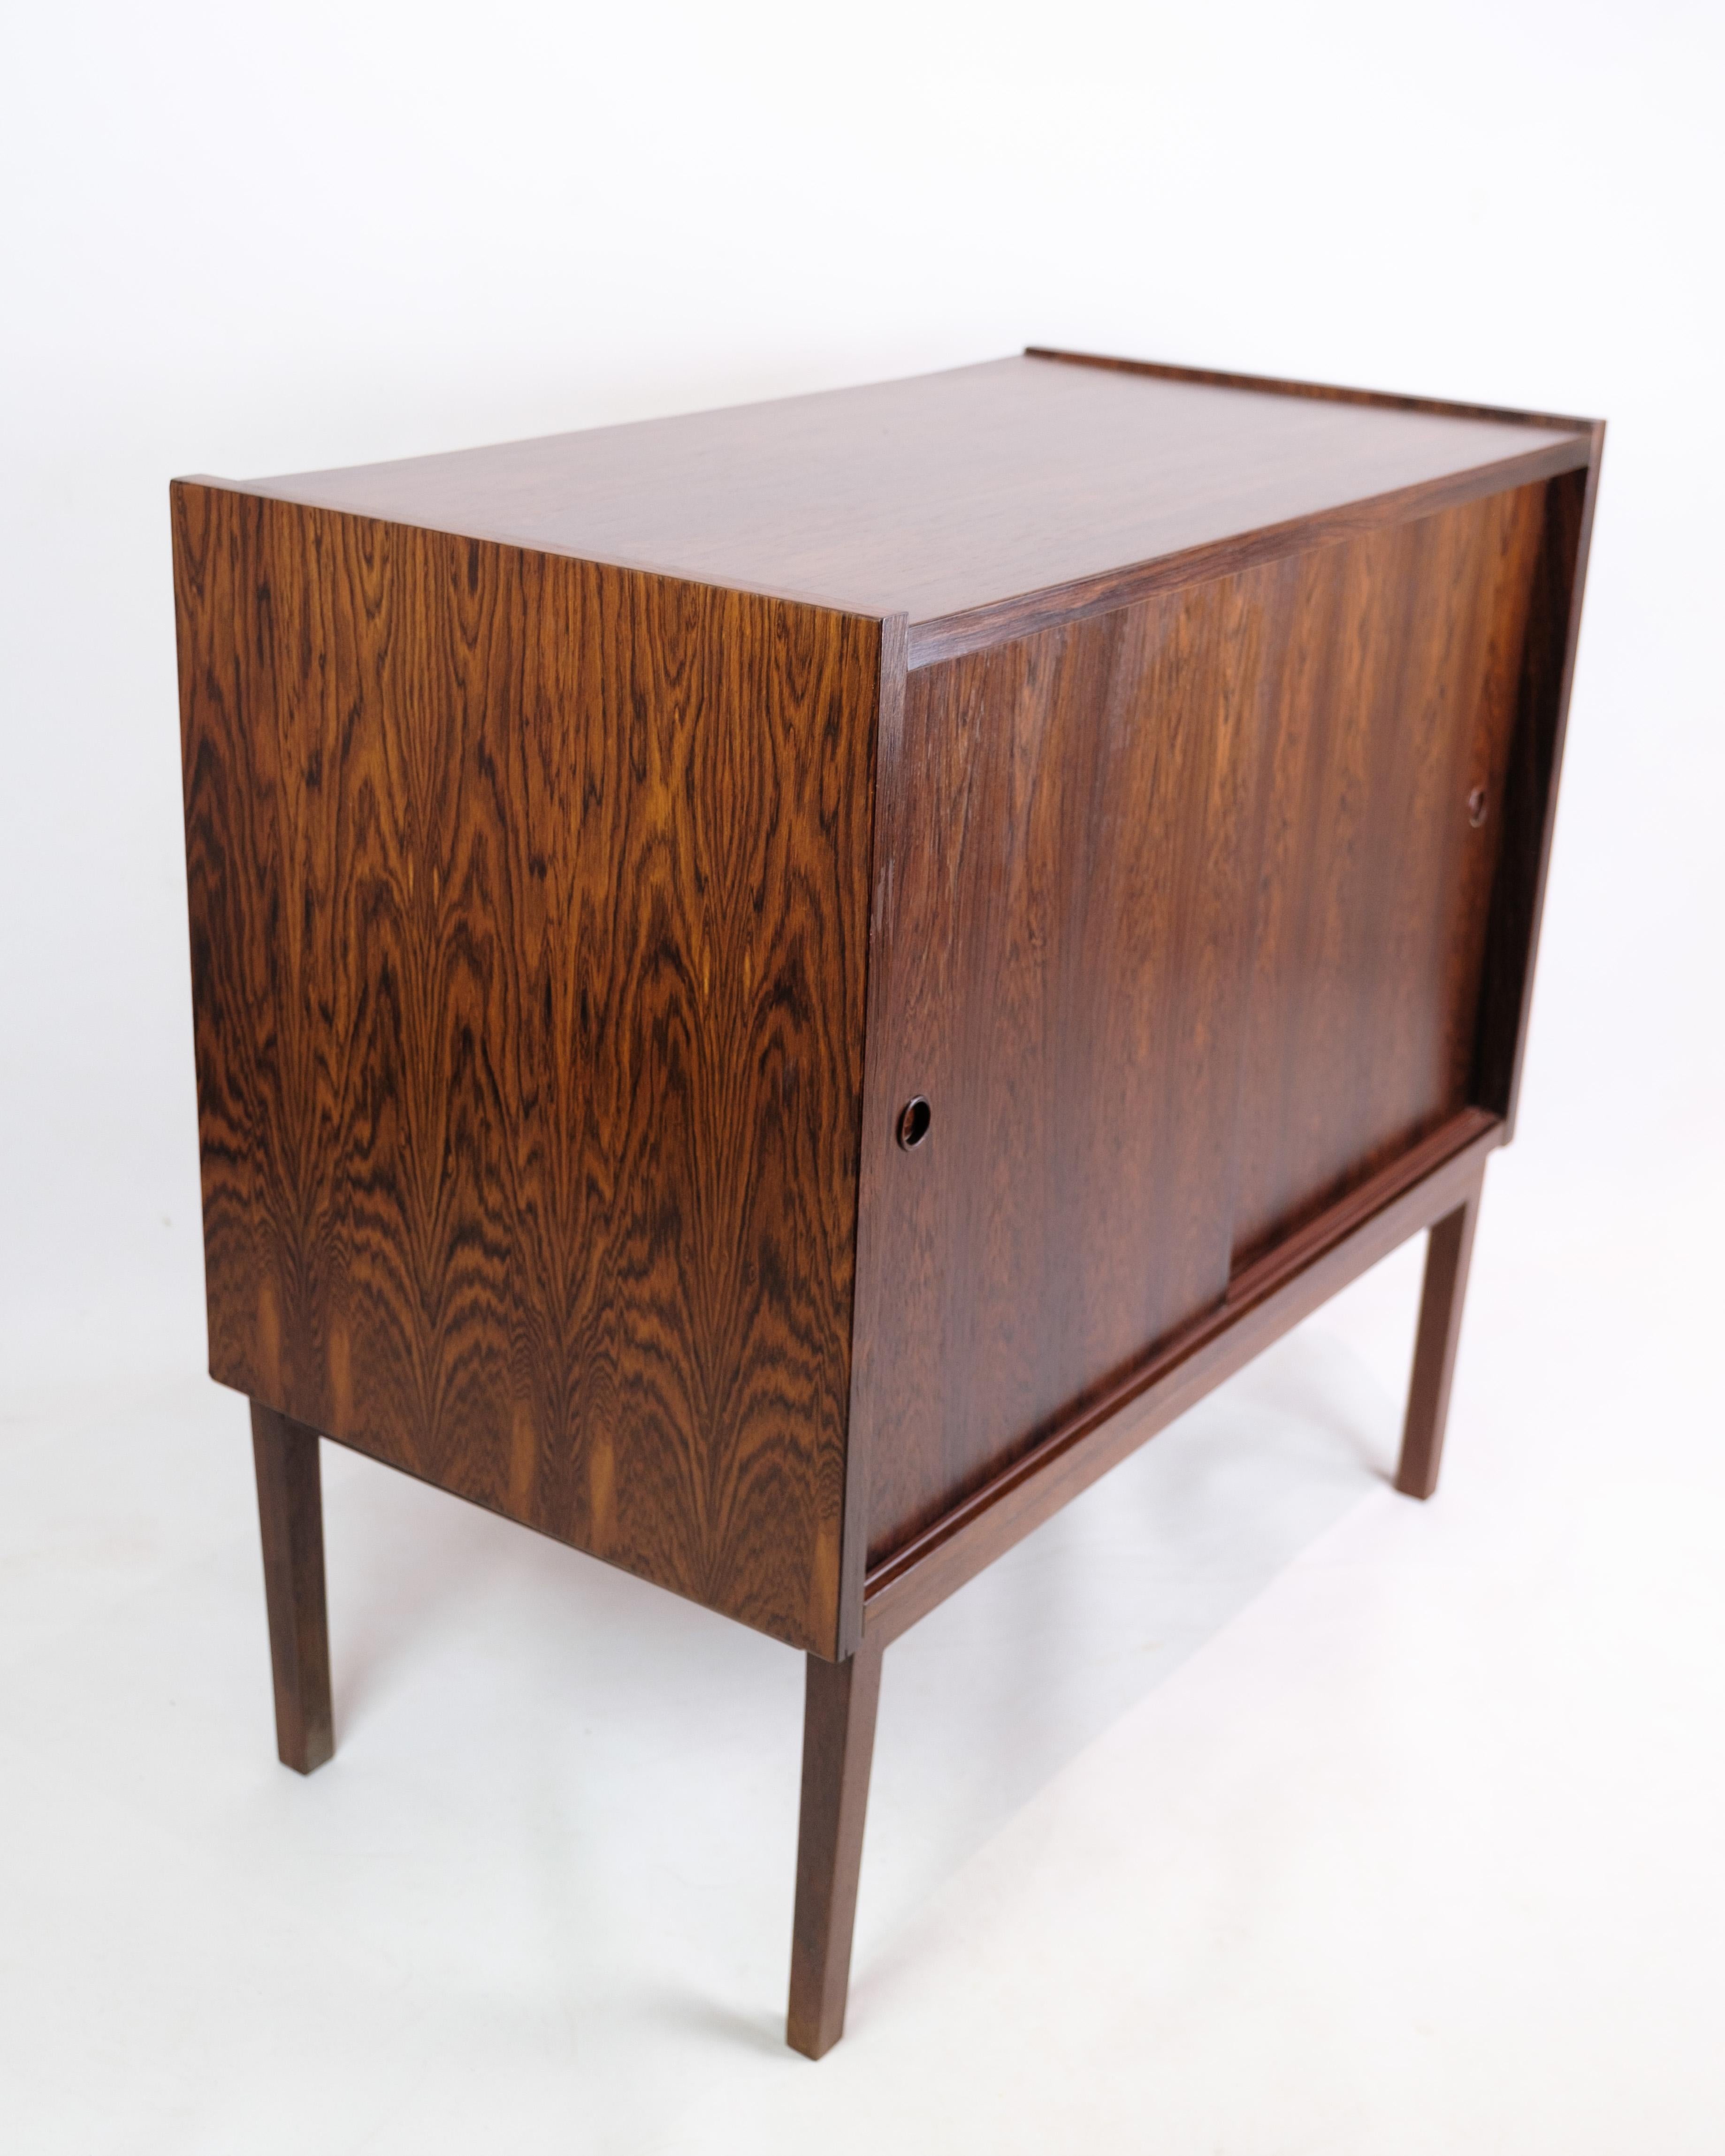 Sideboard With Shelves Made In Rosewood, Danish Design From 1960s For Sale 3